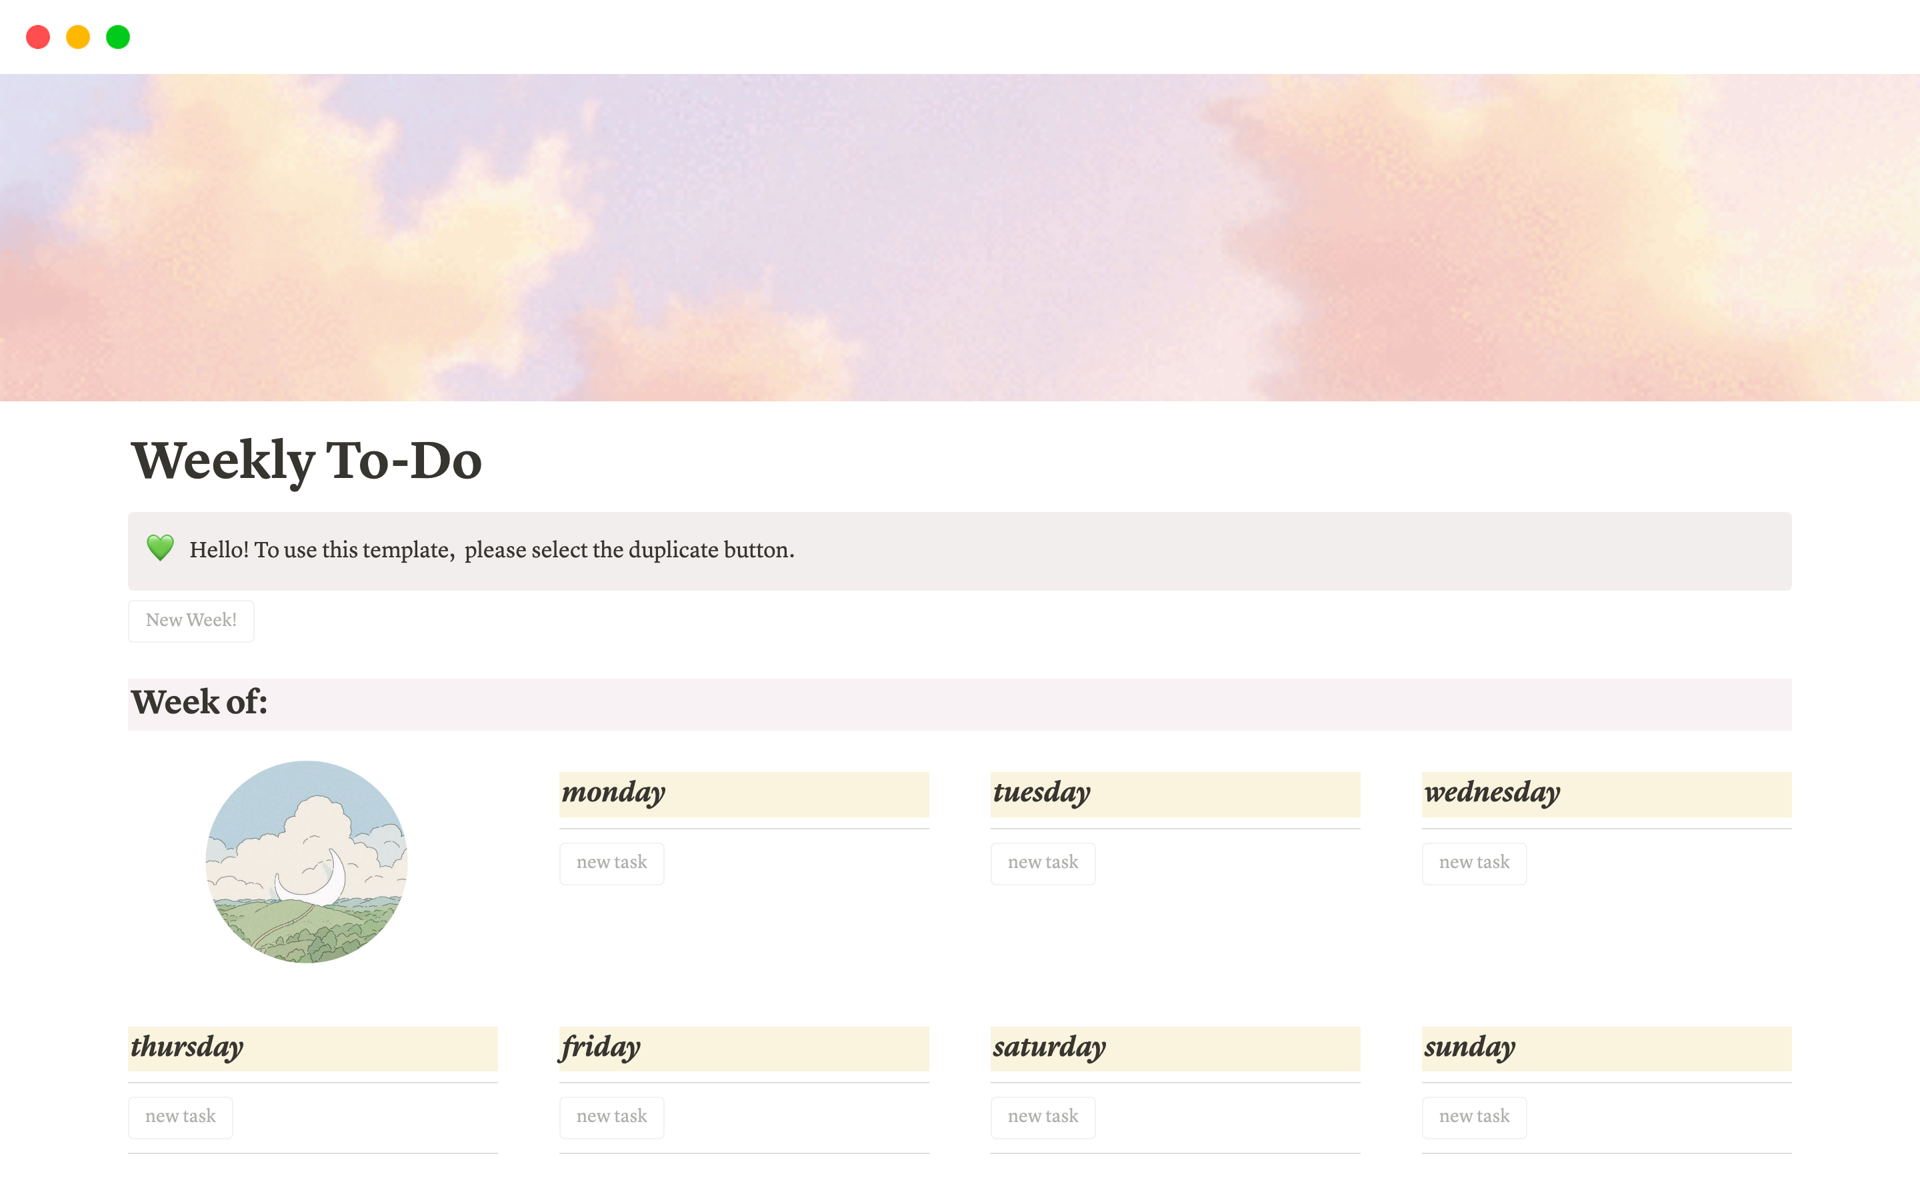 A weekly to-do list with a "New Week" button to automatically generate a new week and an archive toggle to archive previous weeks. 